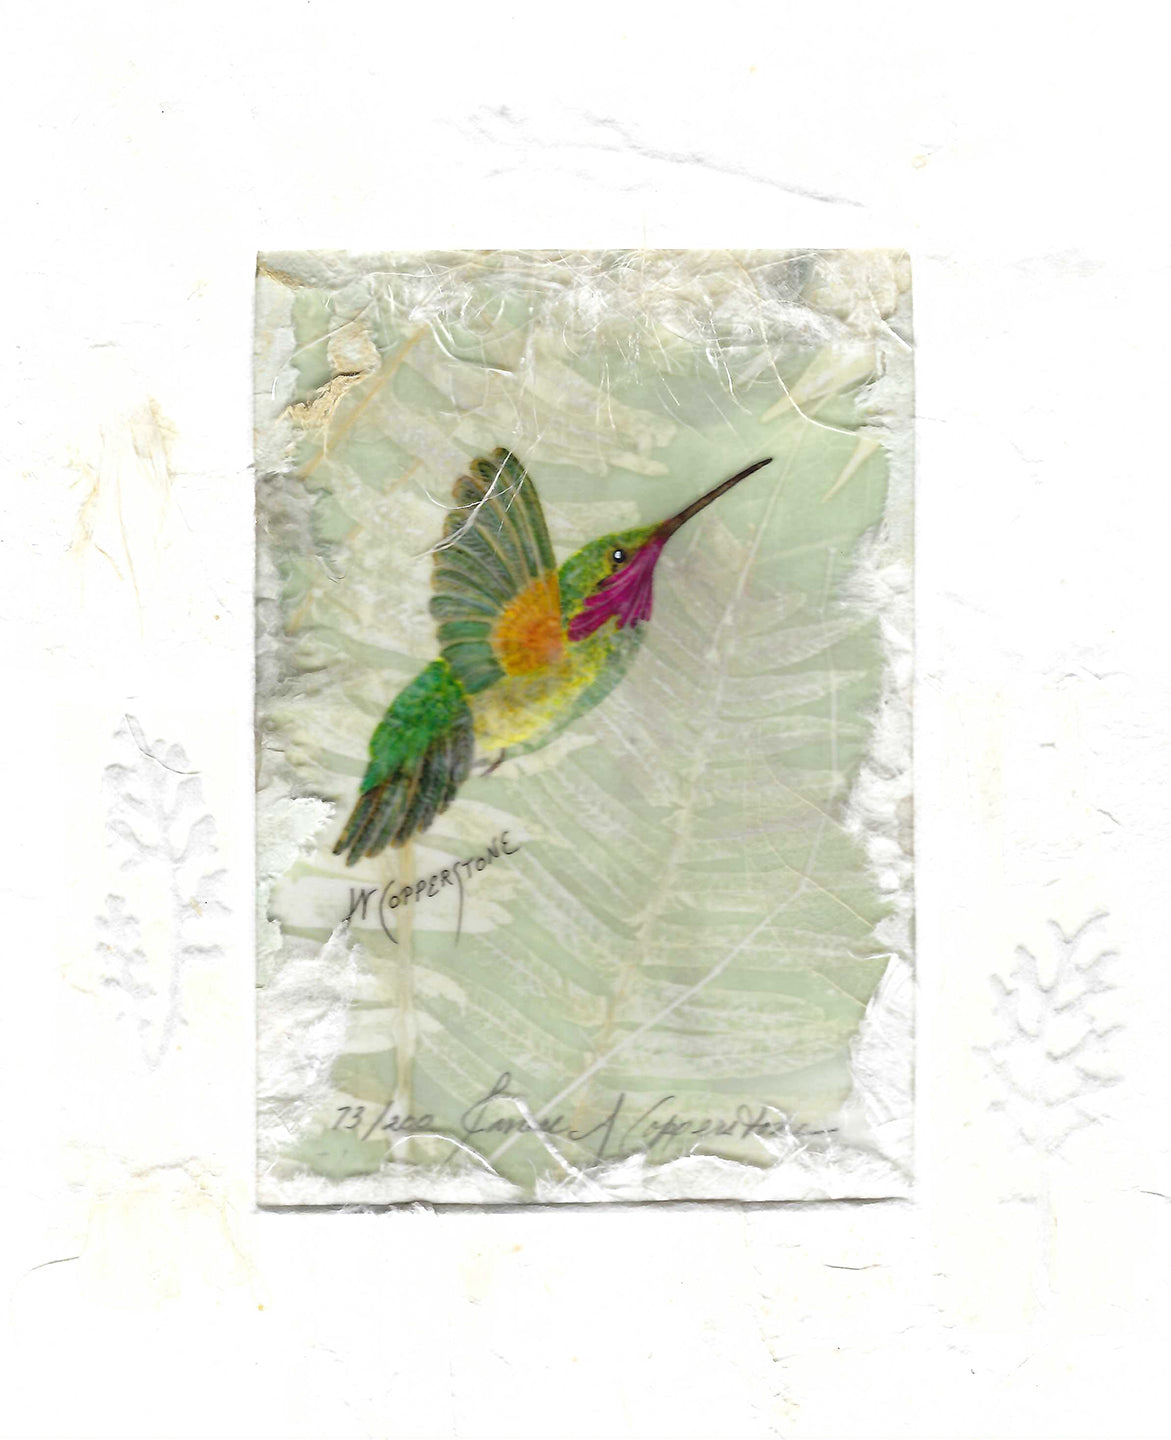 Hummingbird mixed media fine art print by Janice A. Copperstone of Milford, Mich. 